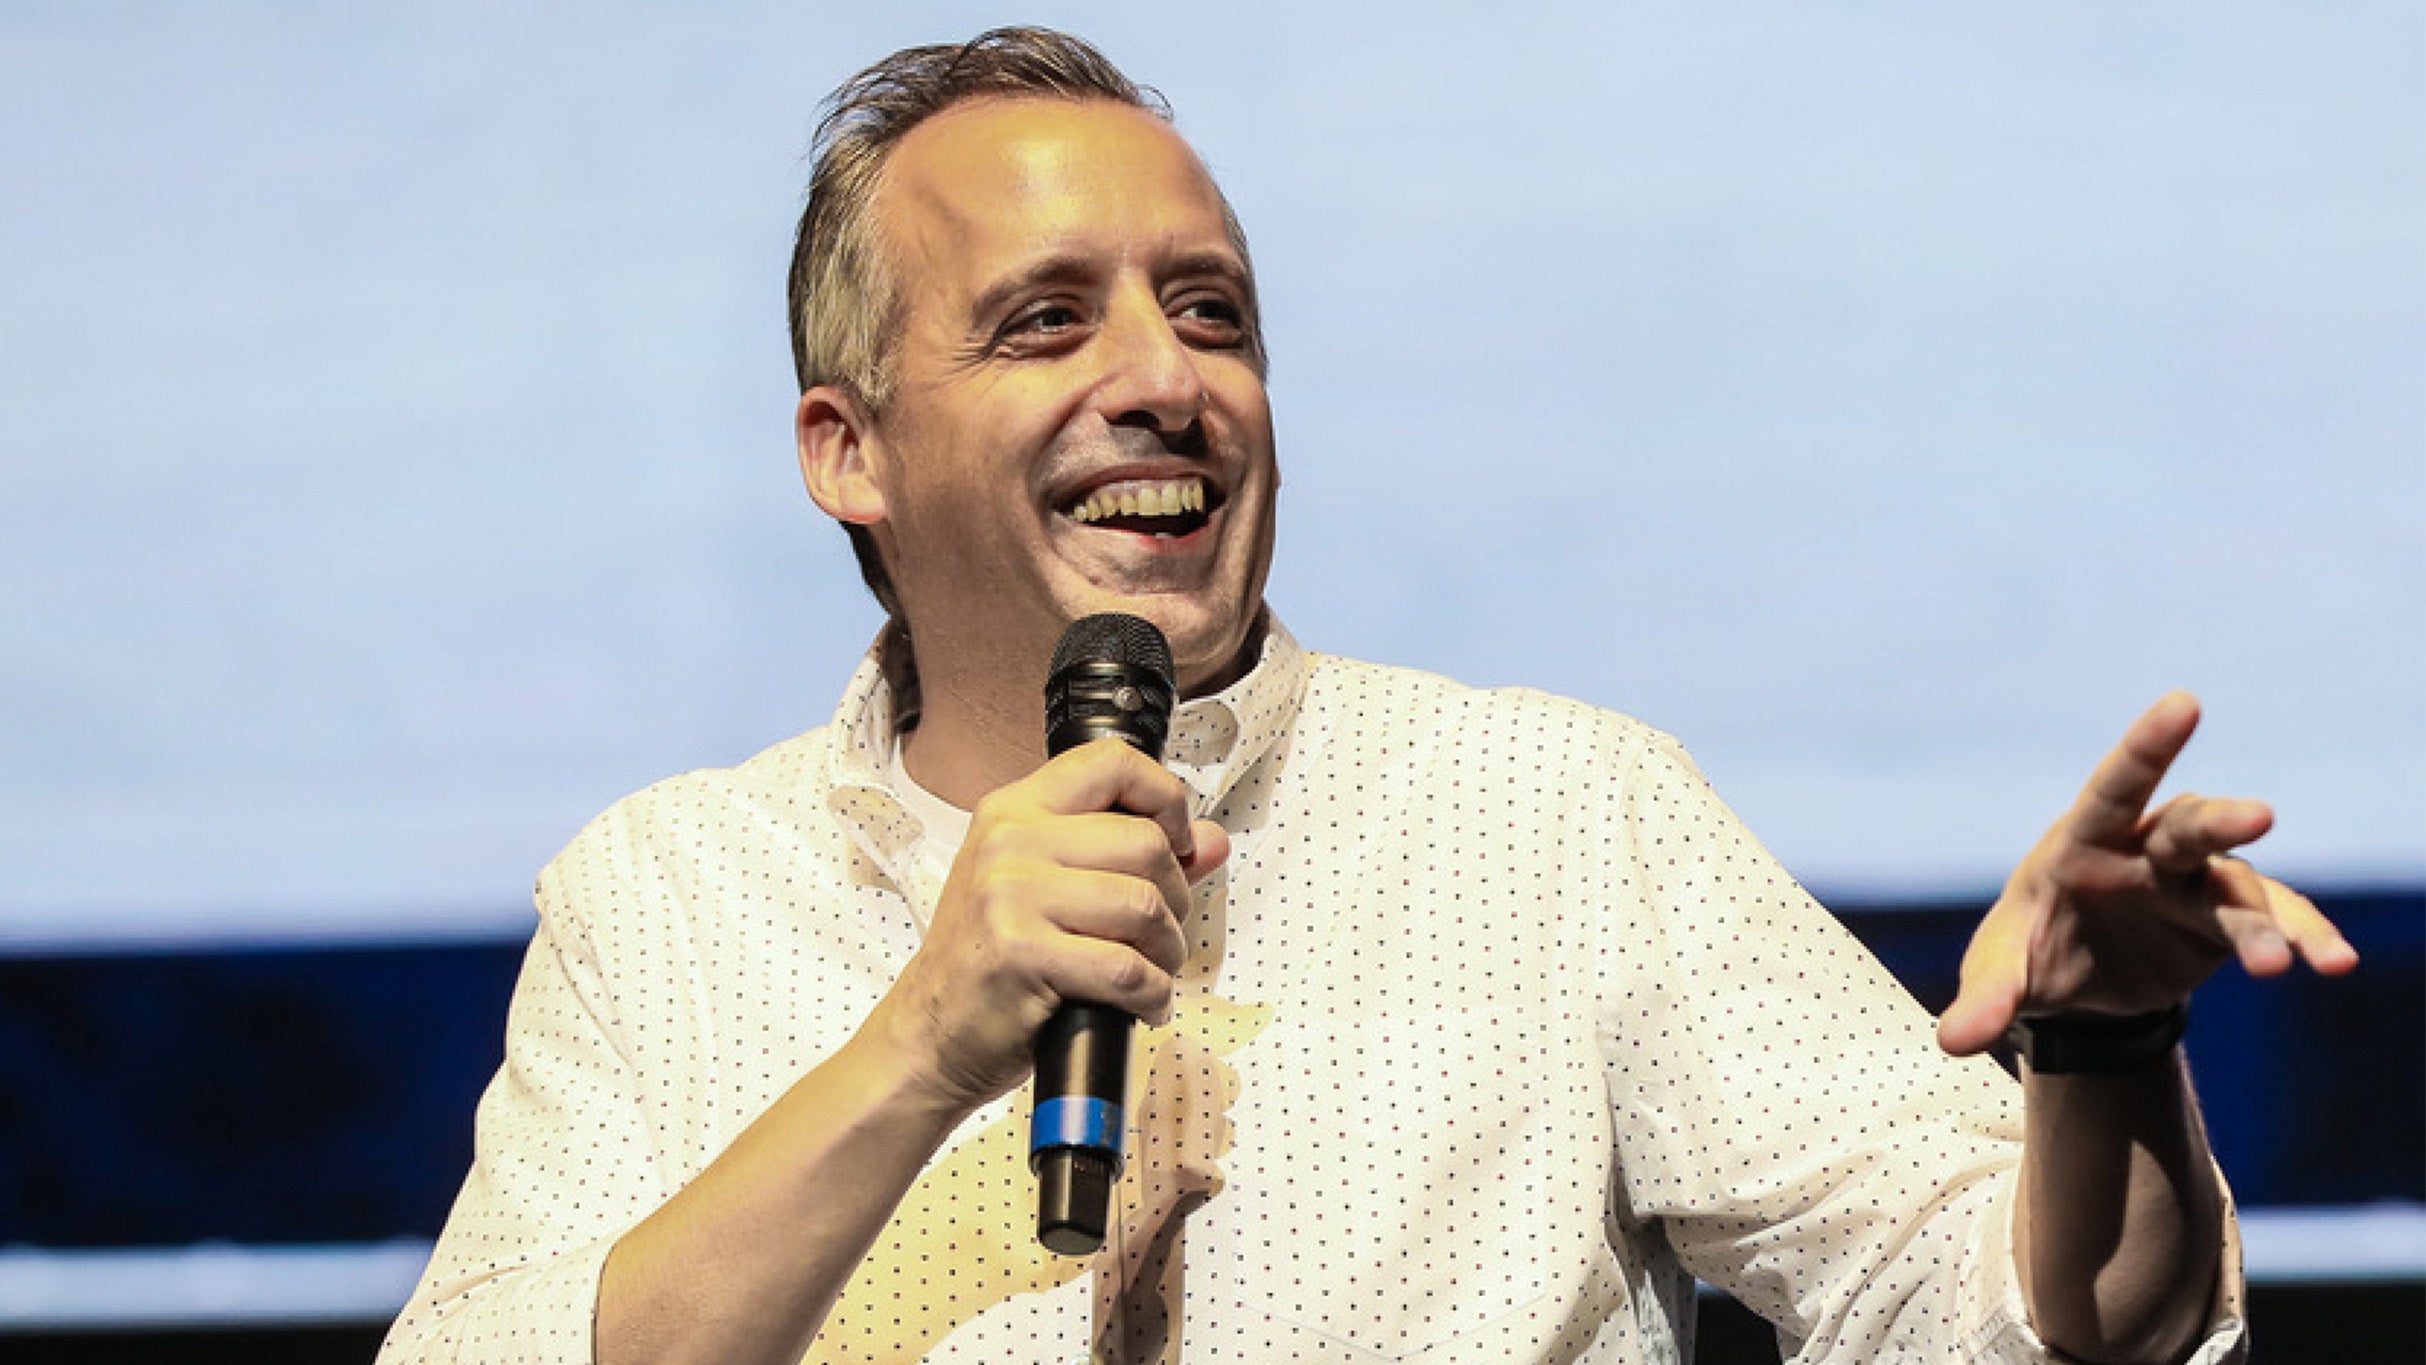 Joe Gatto in Sioux City promo photo for Official Platinum presale offer code